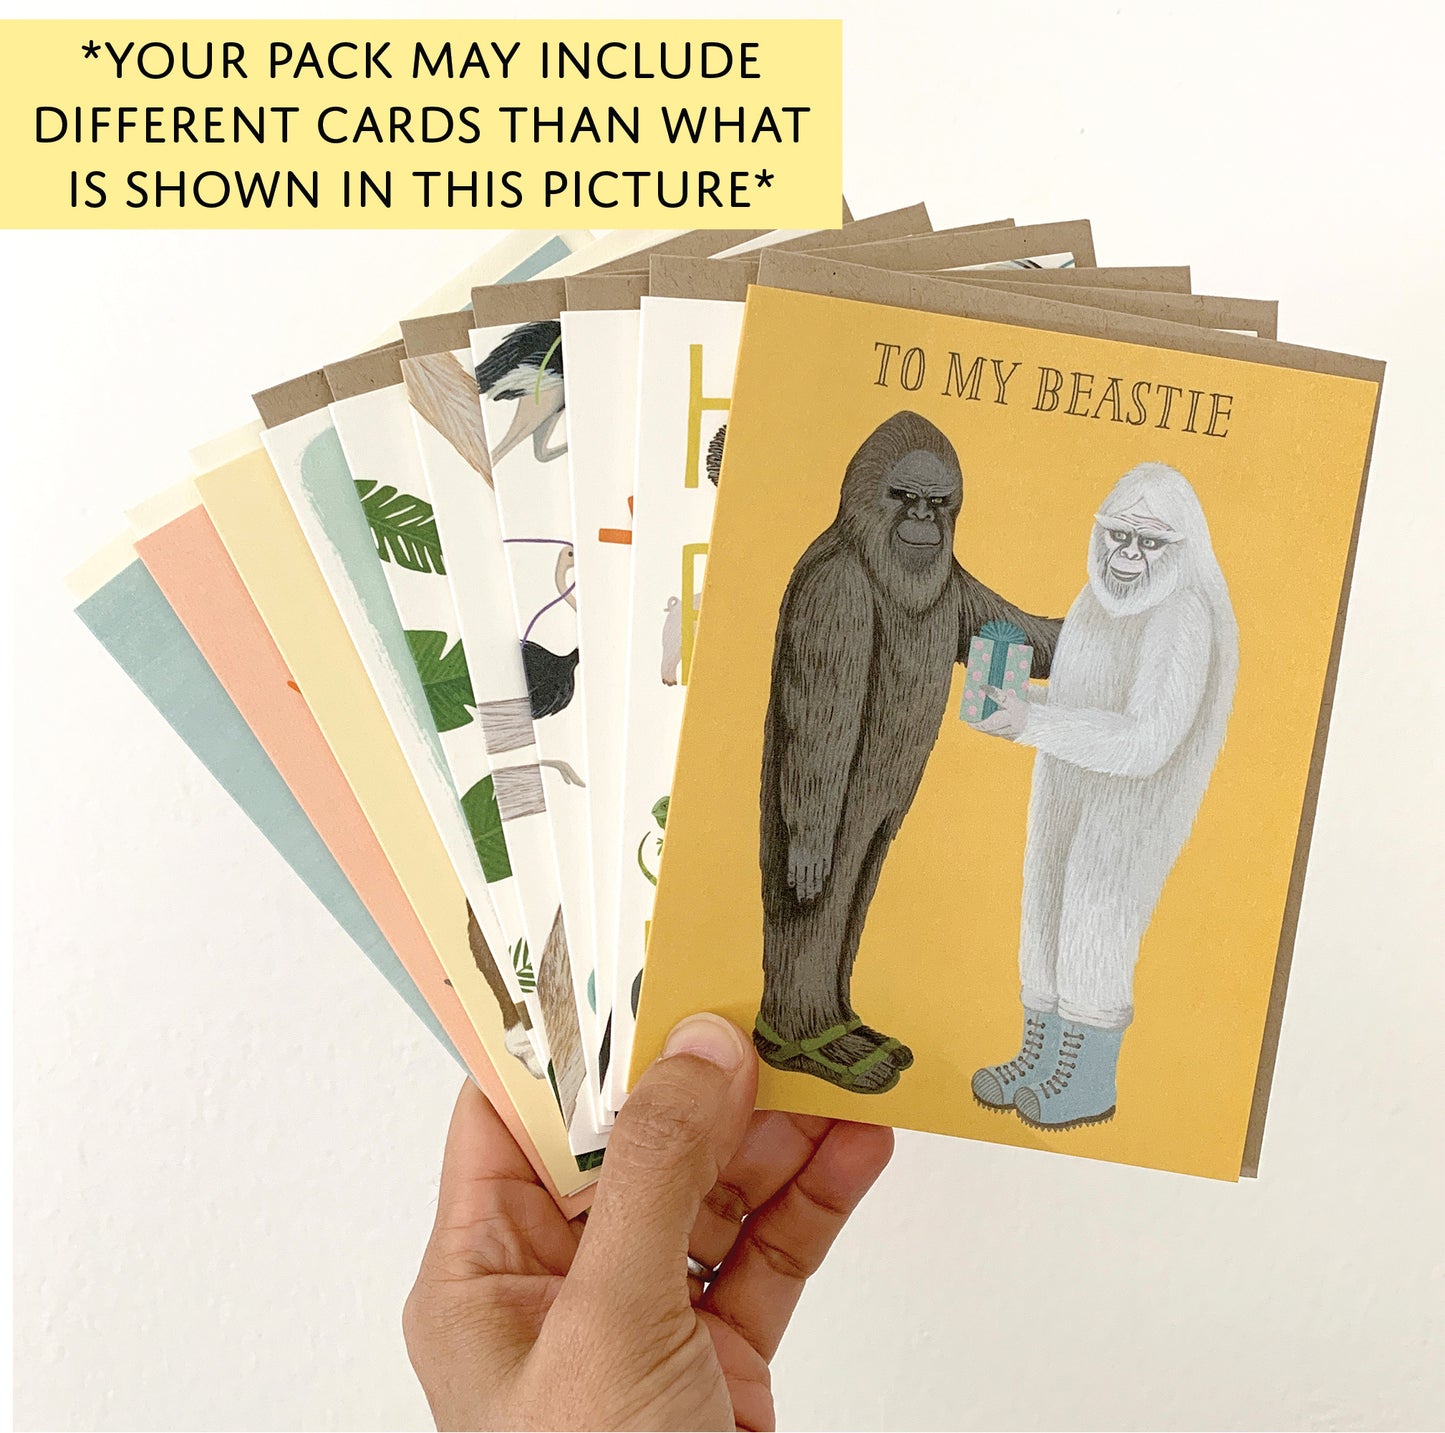 VARIETY SURPRISE PACK OF 10 ASSORTED GREETING CARDS